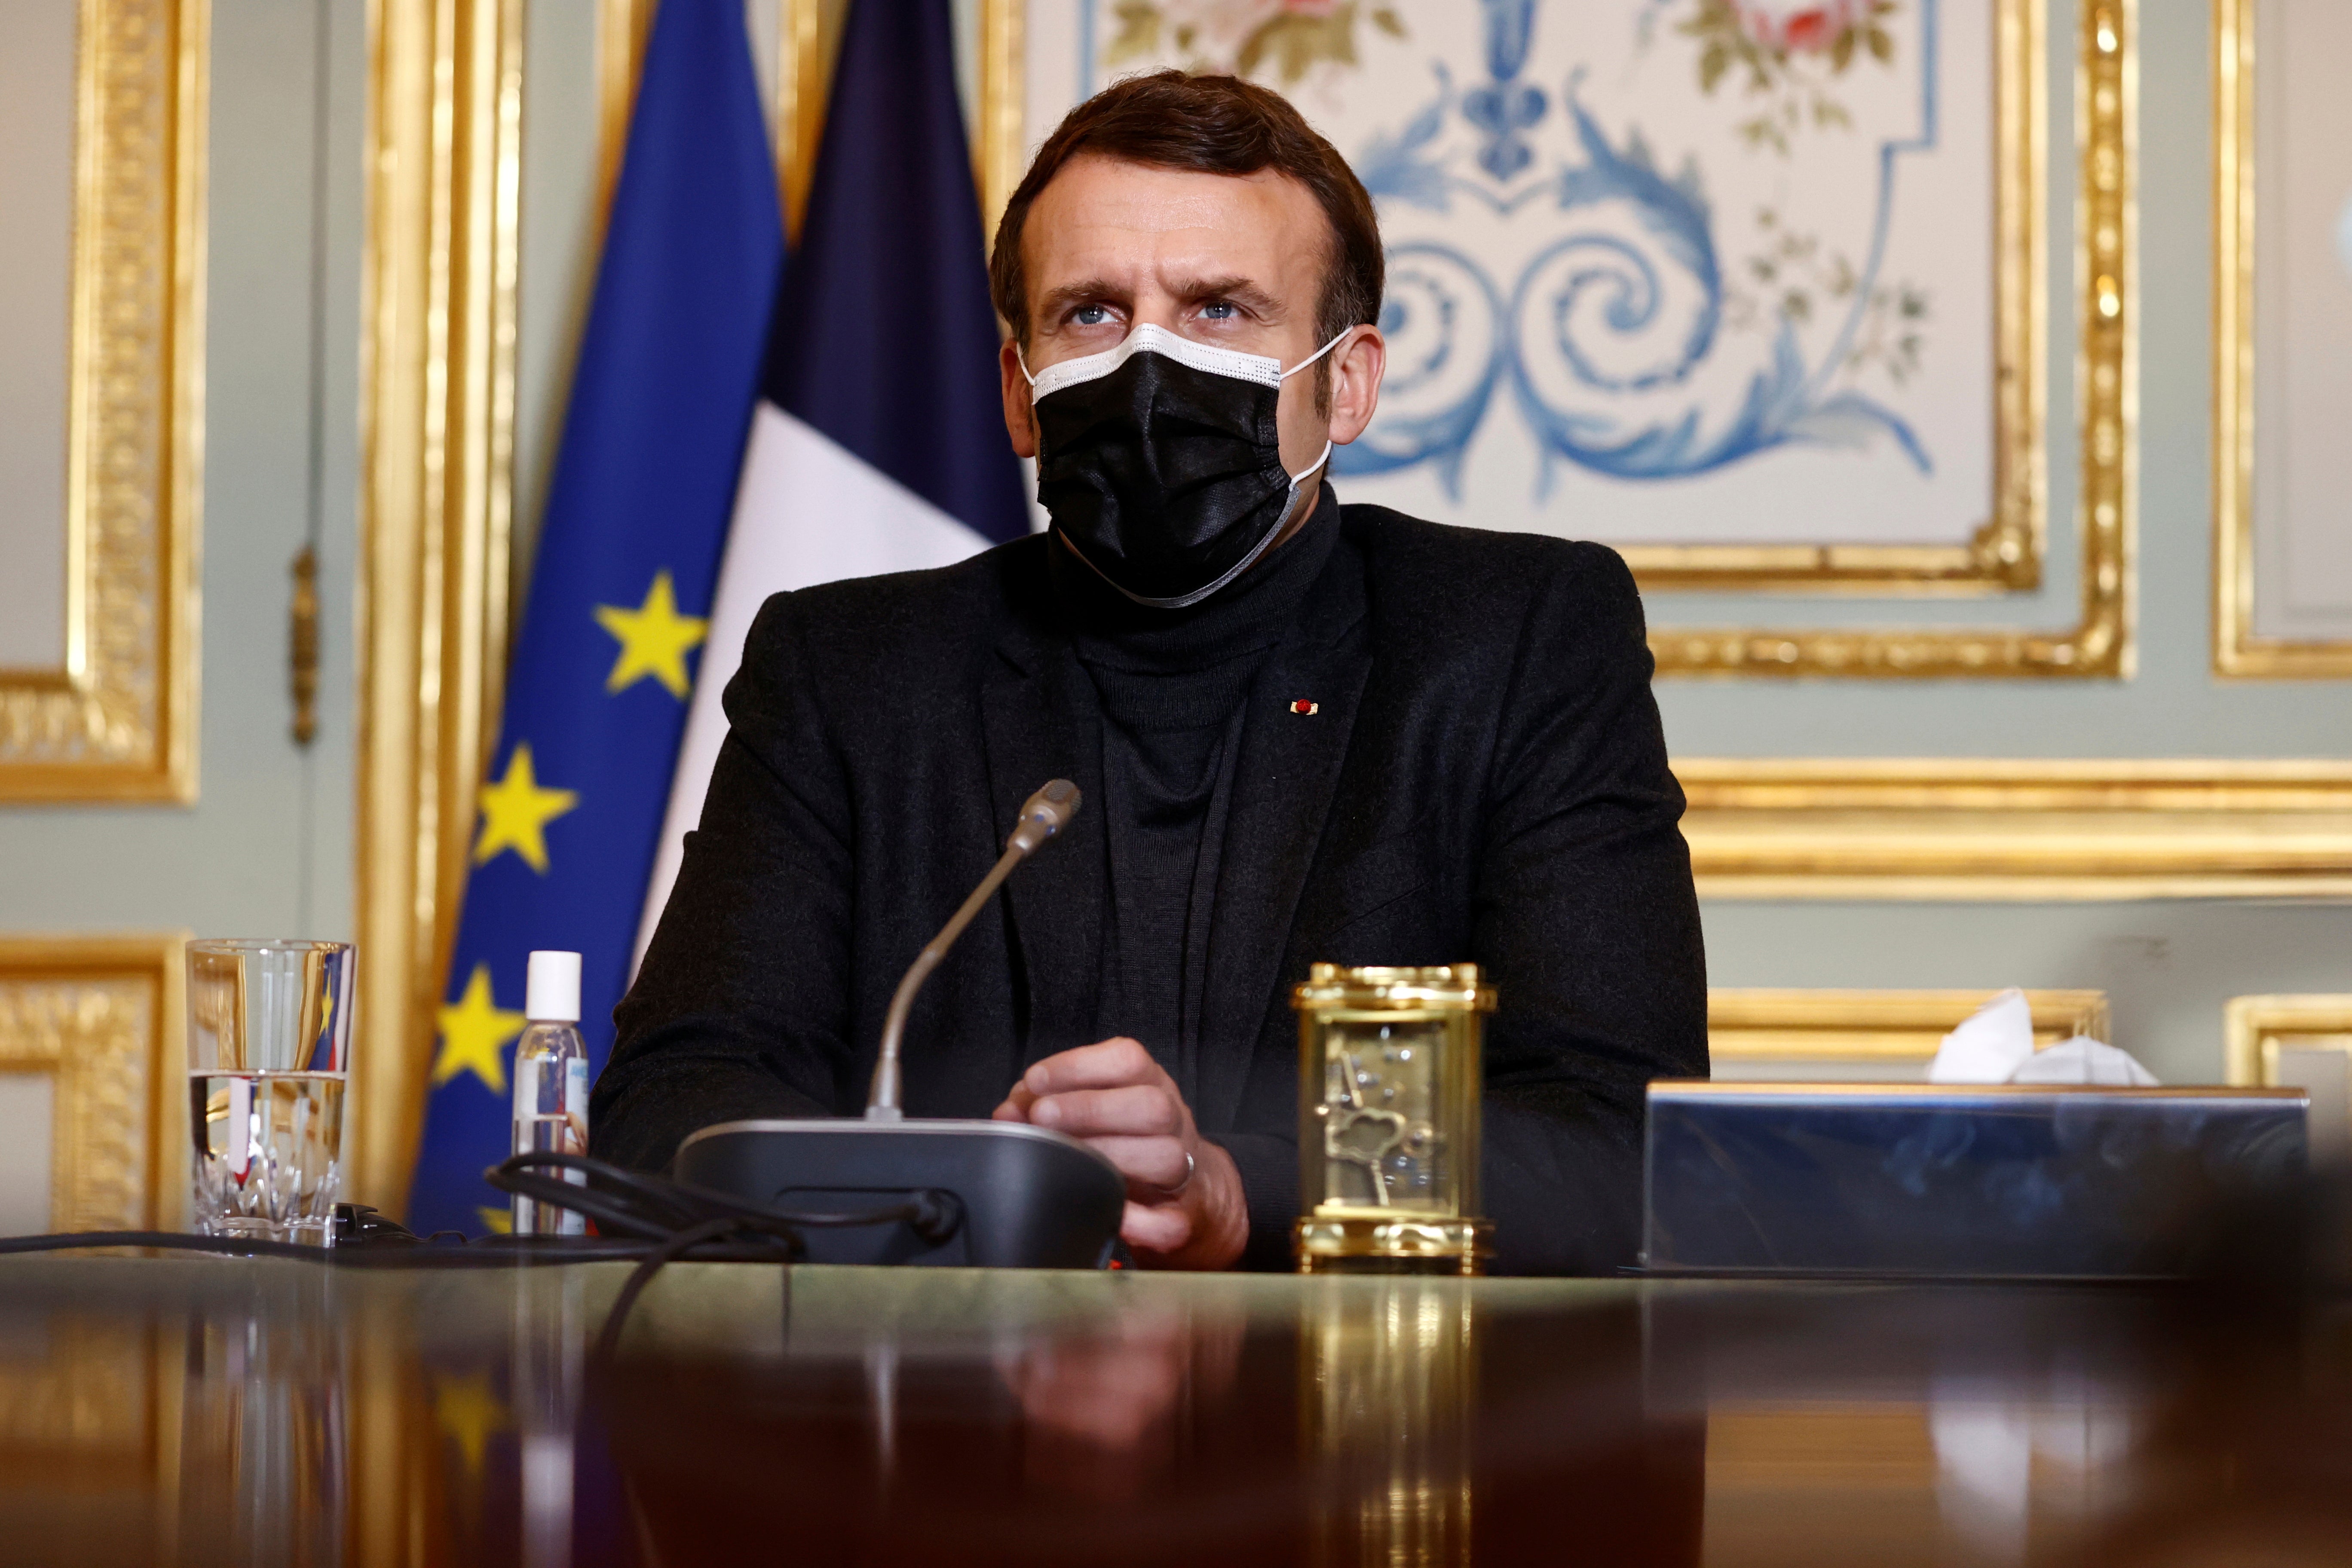 File image: French president Emmanuel Macron earlier declared the Oxford-AstraZeneca vaccine ‘quasi ineffective’ for people over 65